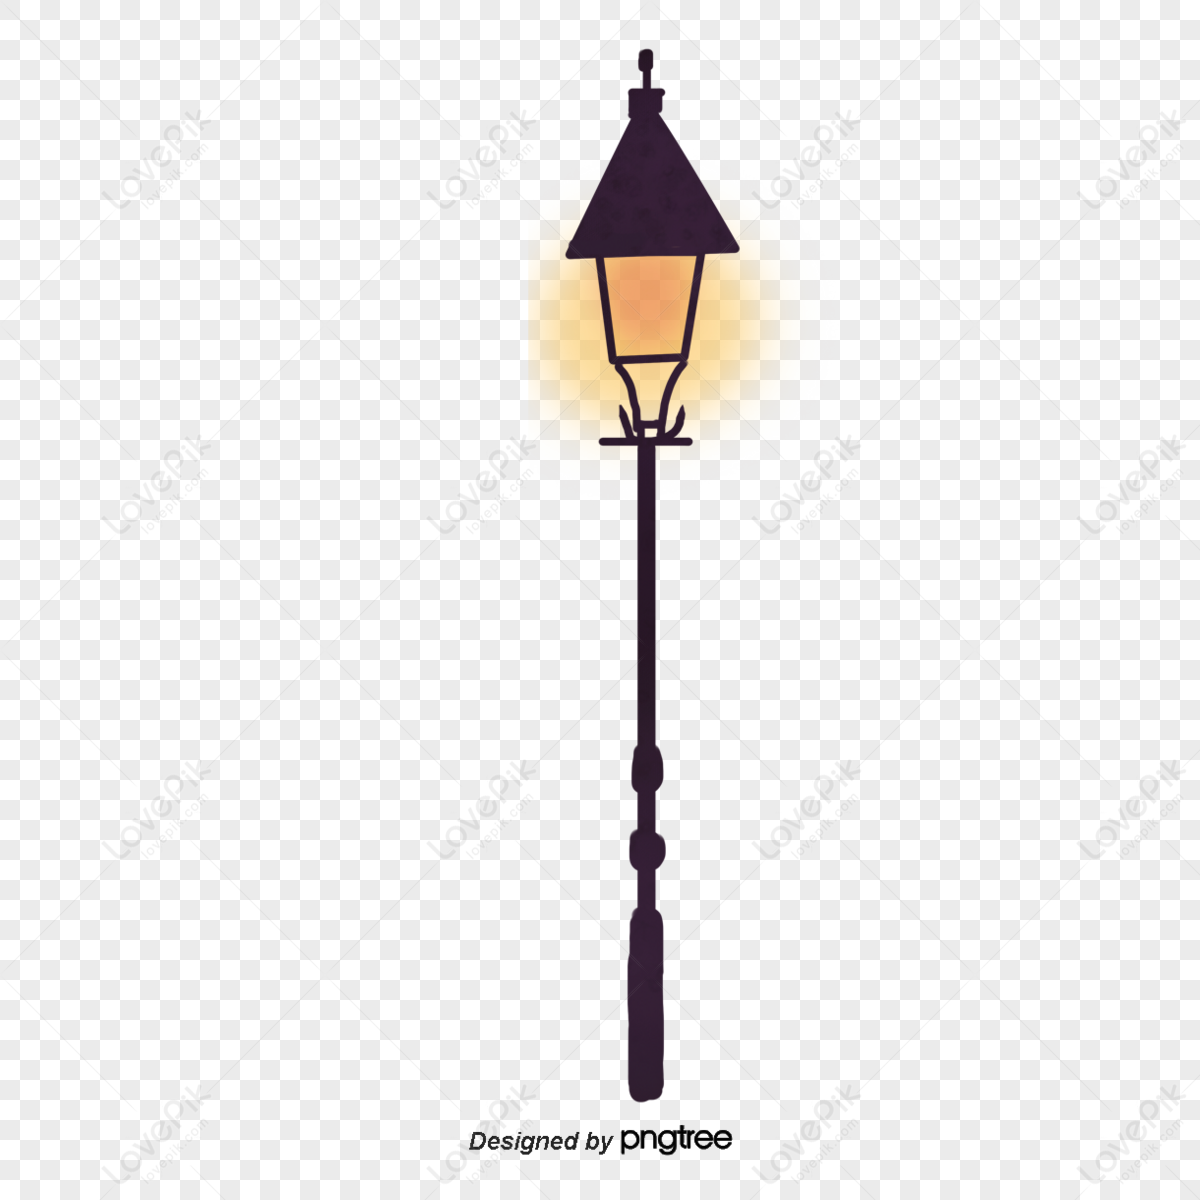 Lamp Post Light Round Bulb Image Vector Illustration Hand Drawing Royalty  Free SVG, Cliparts, Vectors, and Stock Illustration. Image 112326186.